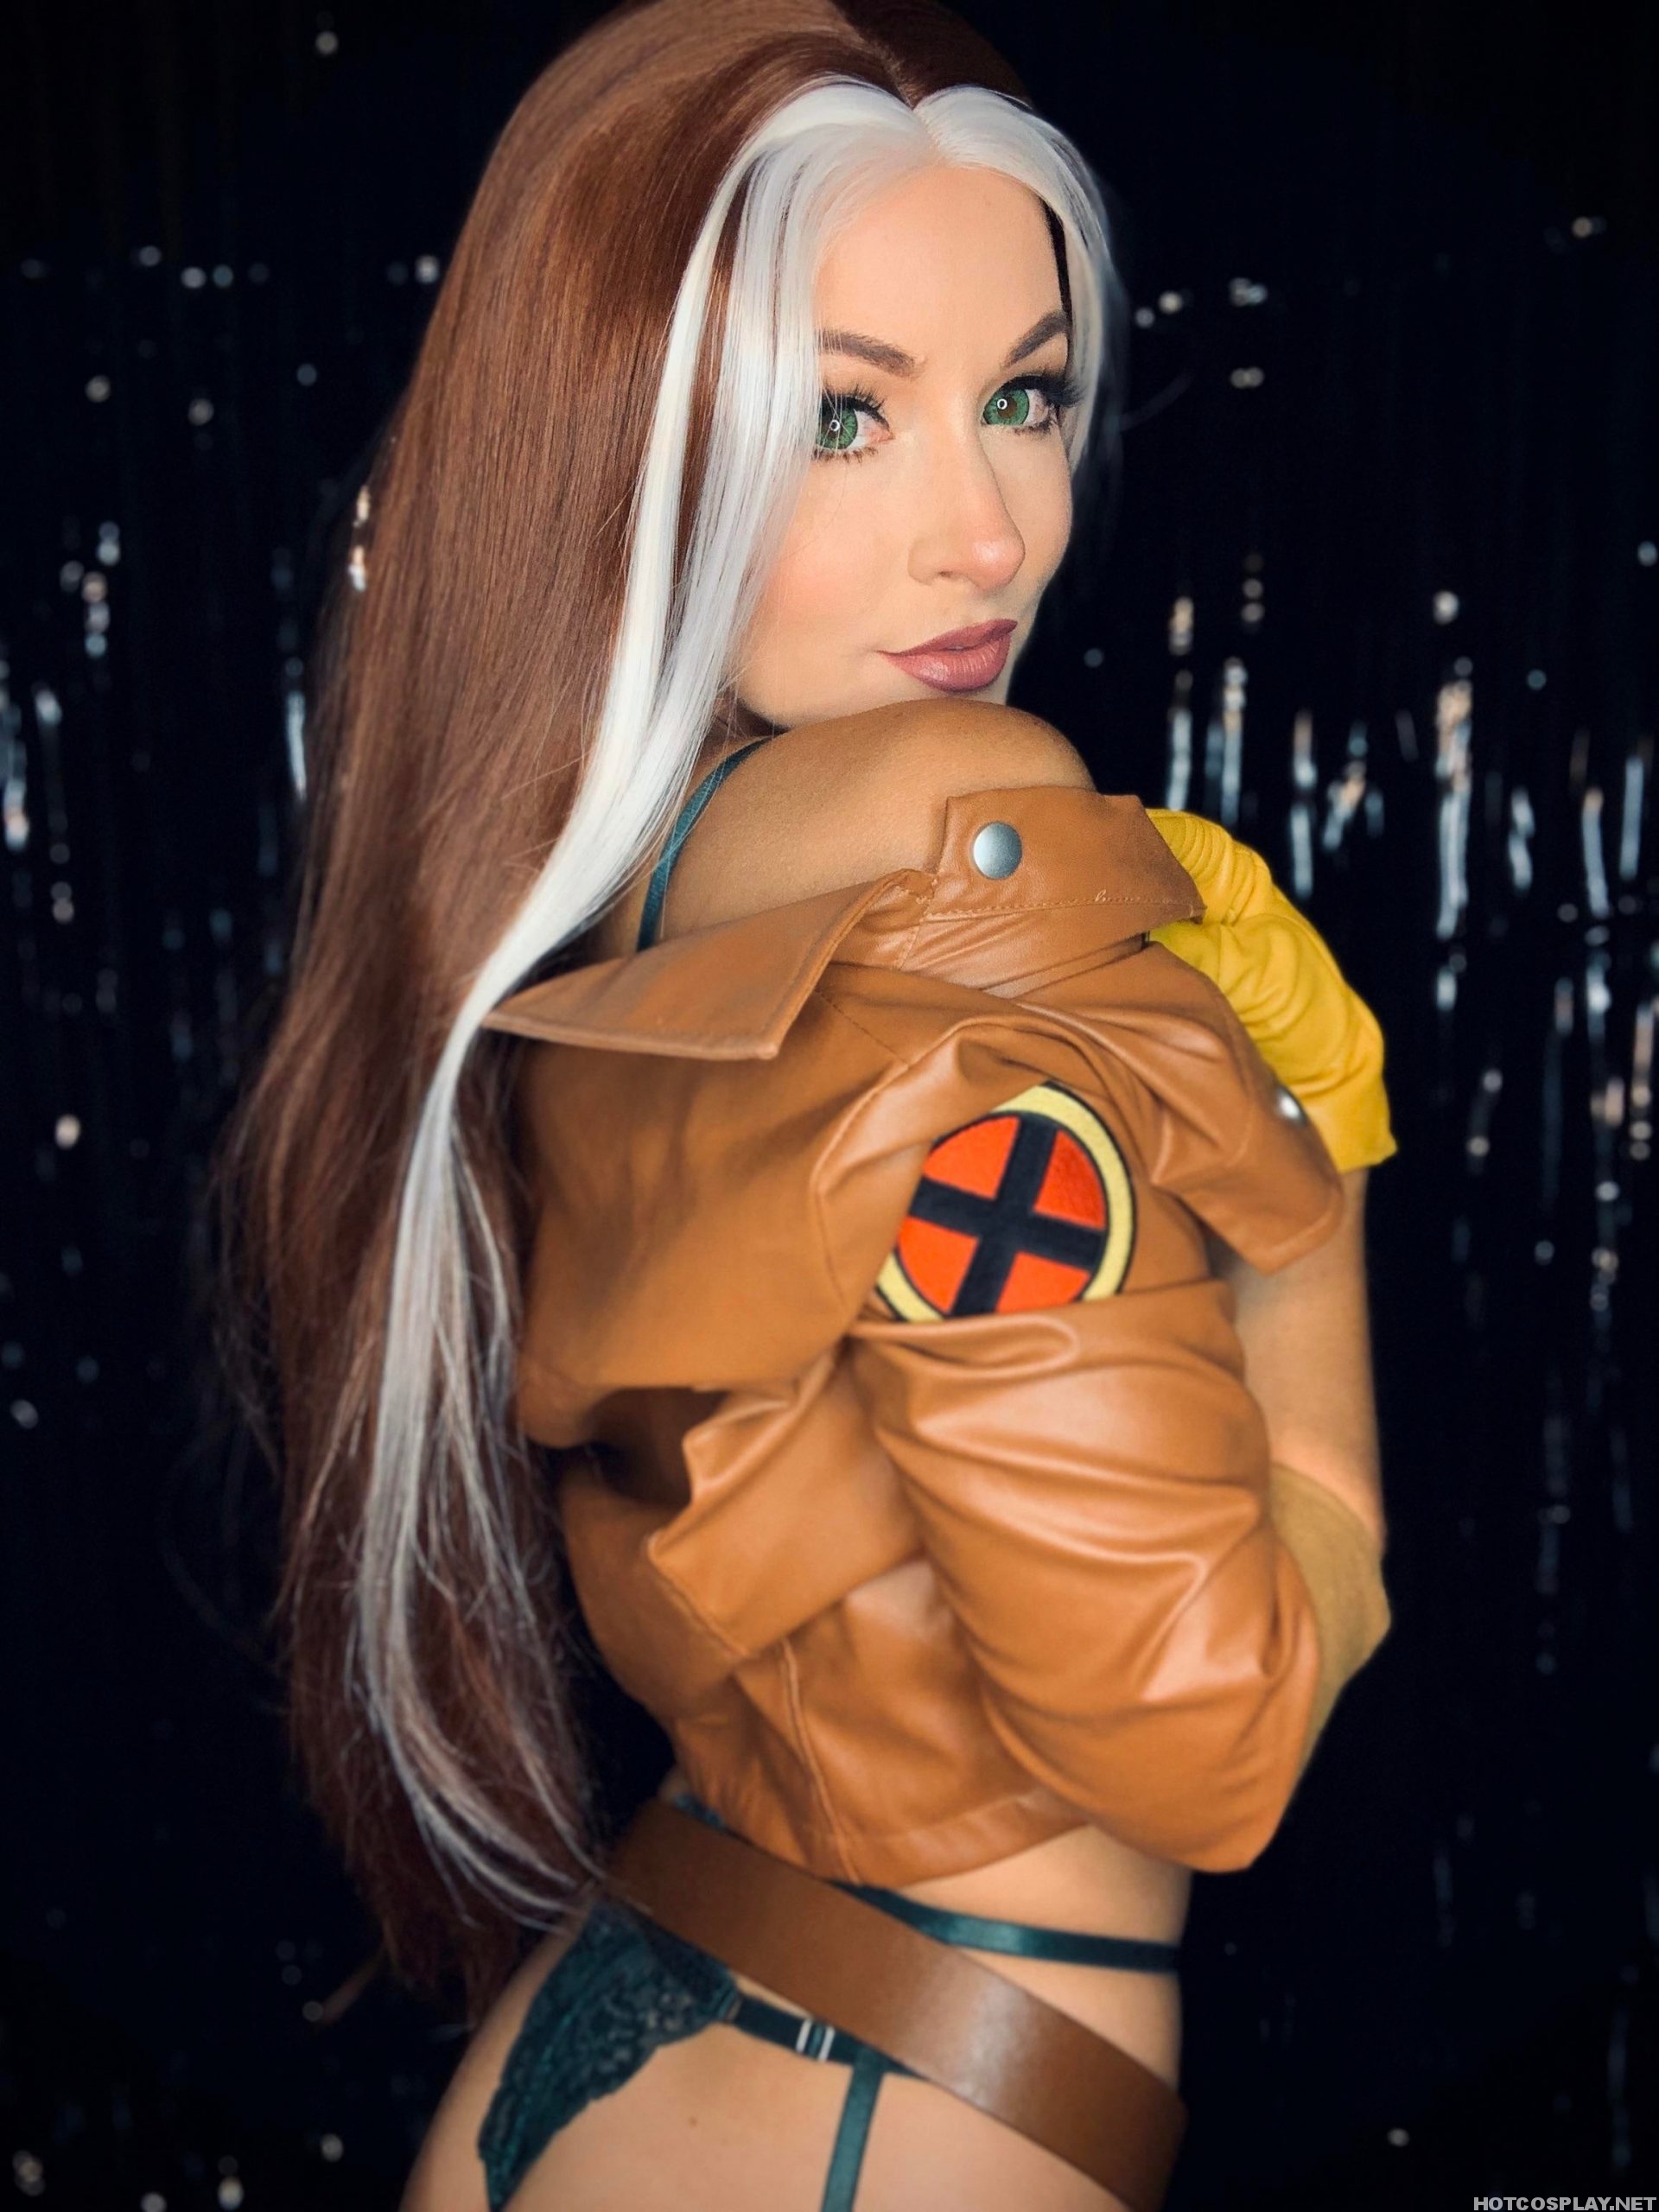 1920px x 2560px - X-Men Fans Will Love This Lewd and Nude Rogue Cosplay Collection